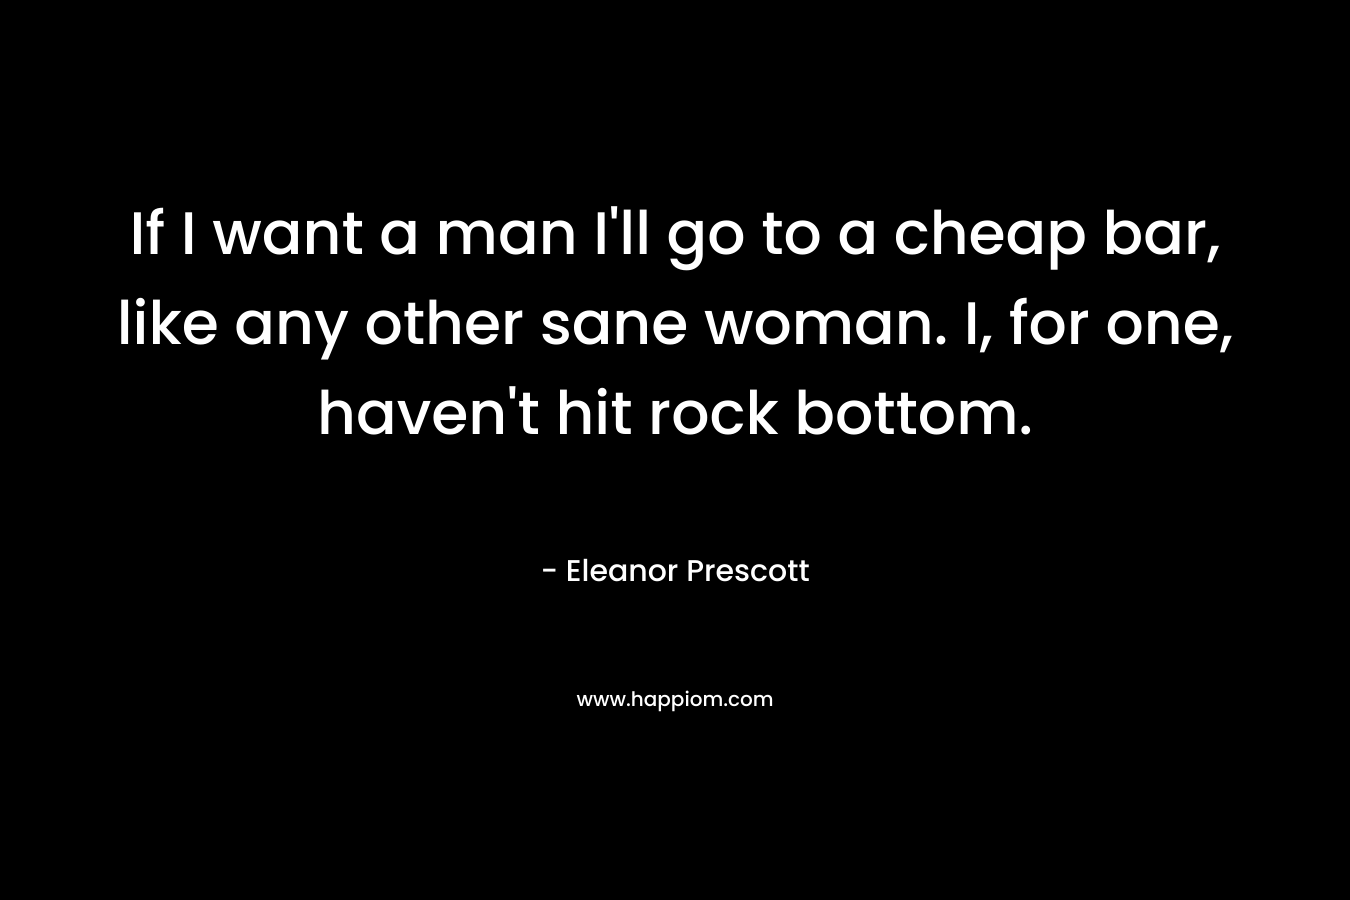 If I want a man I’ll go to a cheap bar, like any other sane woman. I, for one, haven’t hit rock bottom. – Eleanor Prescott